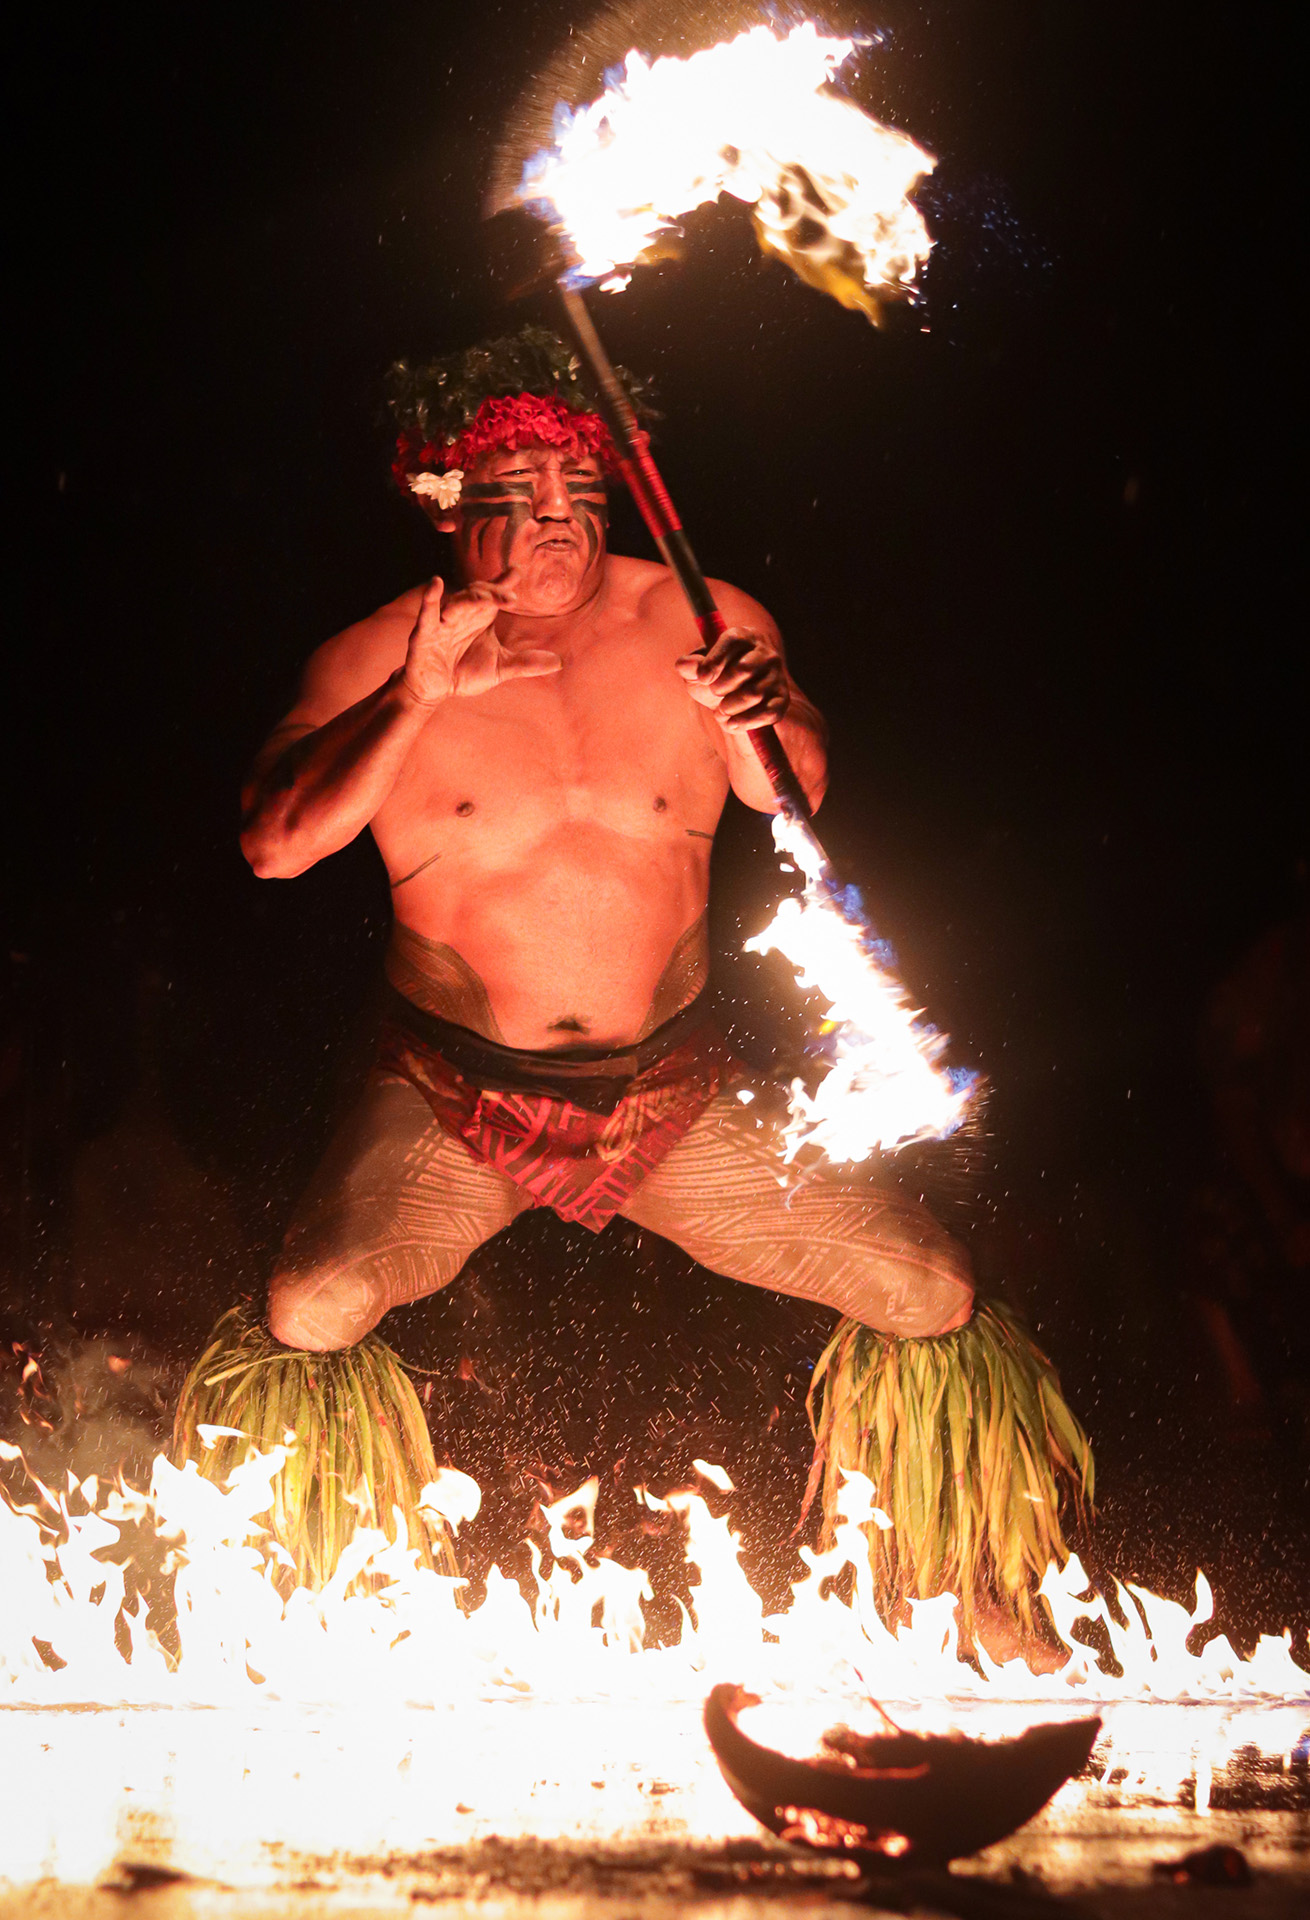 The Chief doing a traditional fire-knife dance